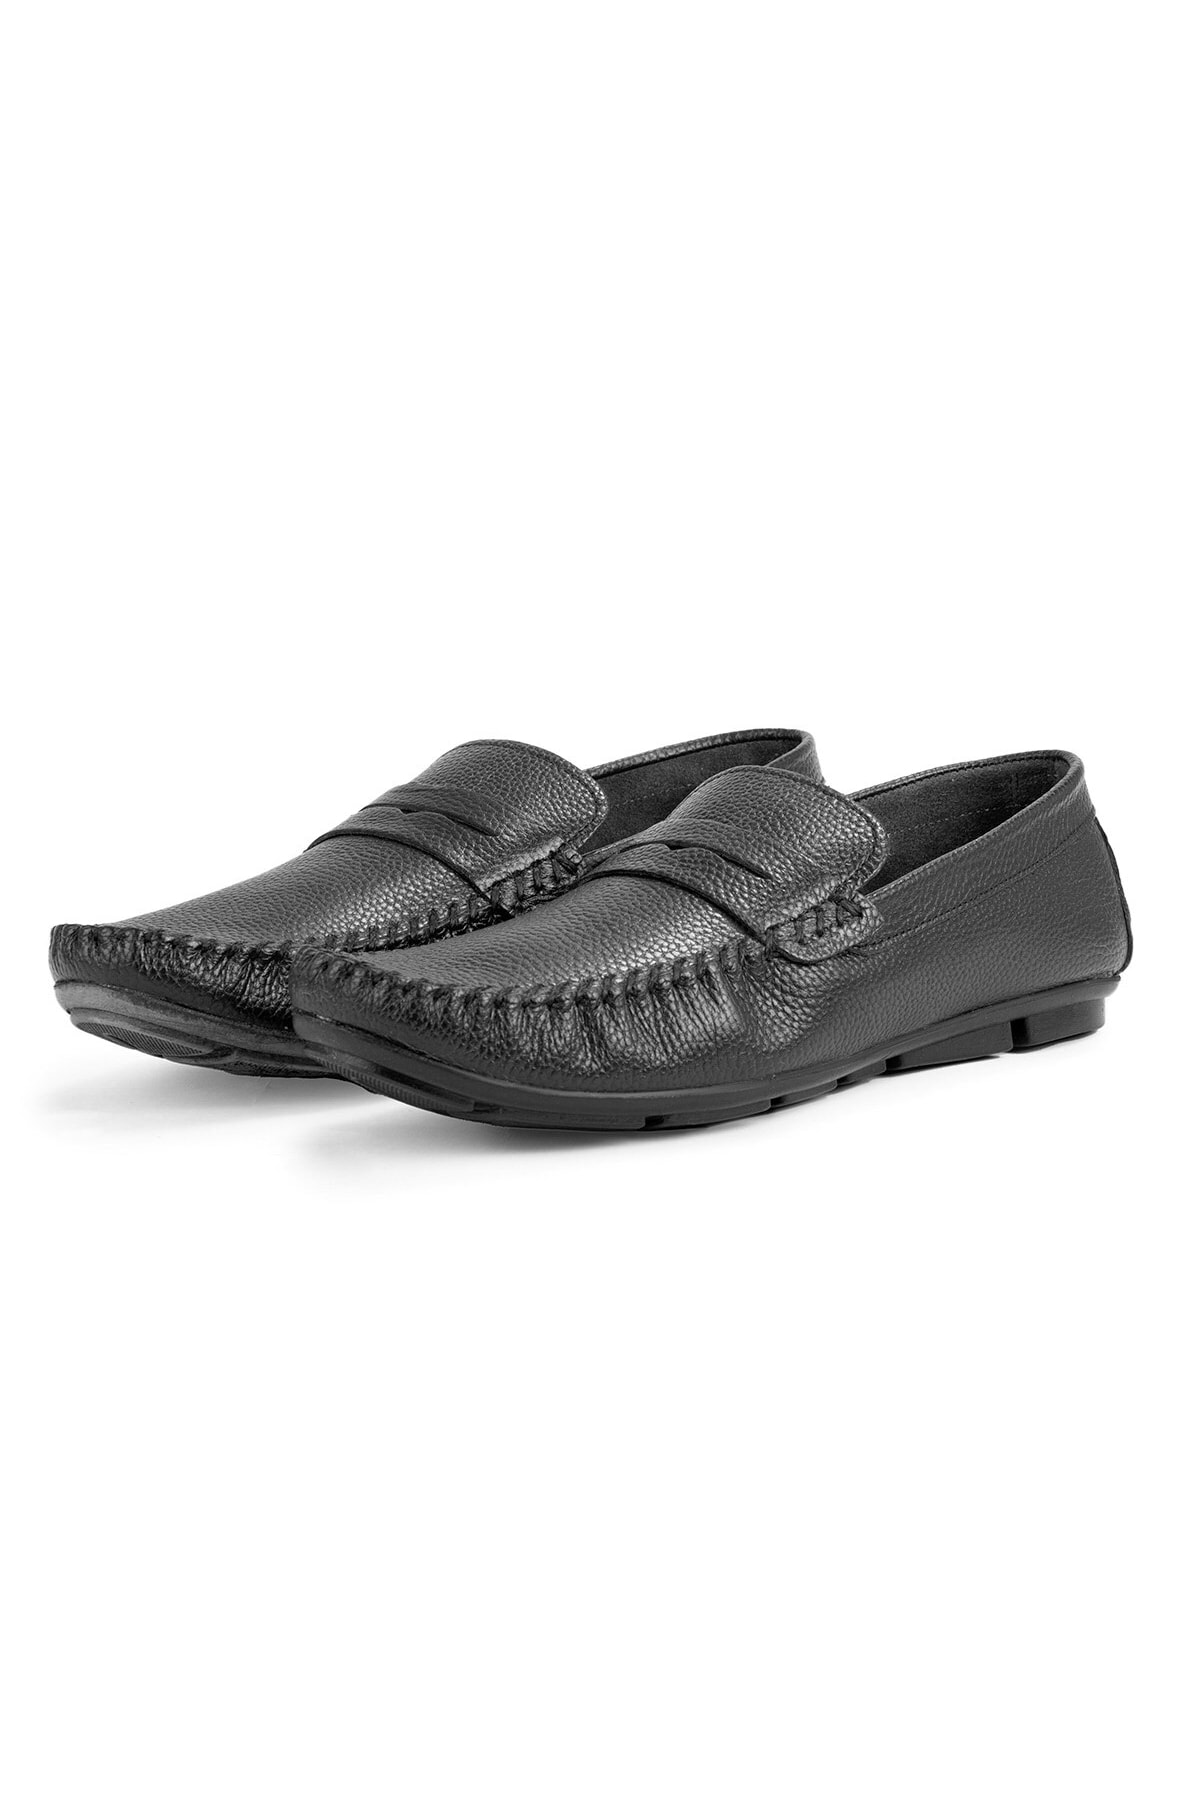 Levně Ducavelli Artsy Genuine Leather Men's Casual Shoes, Rog Loafers.